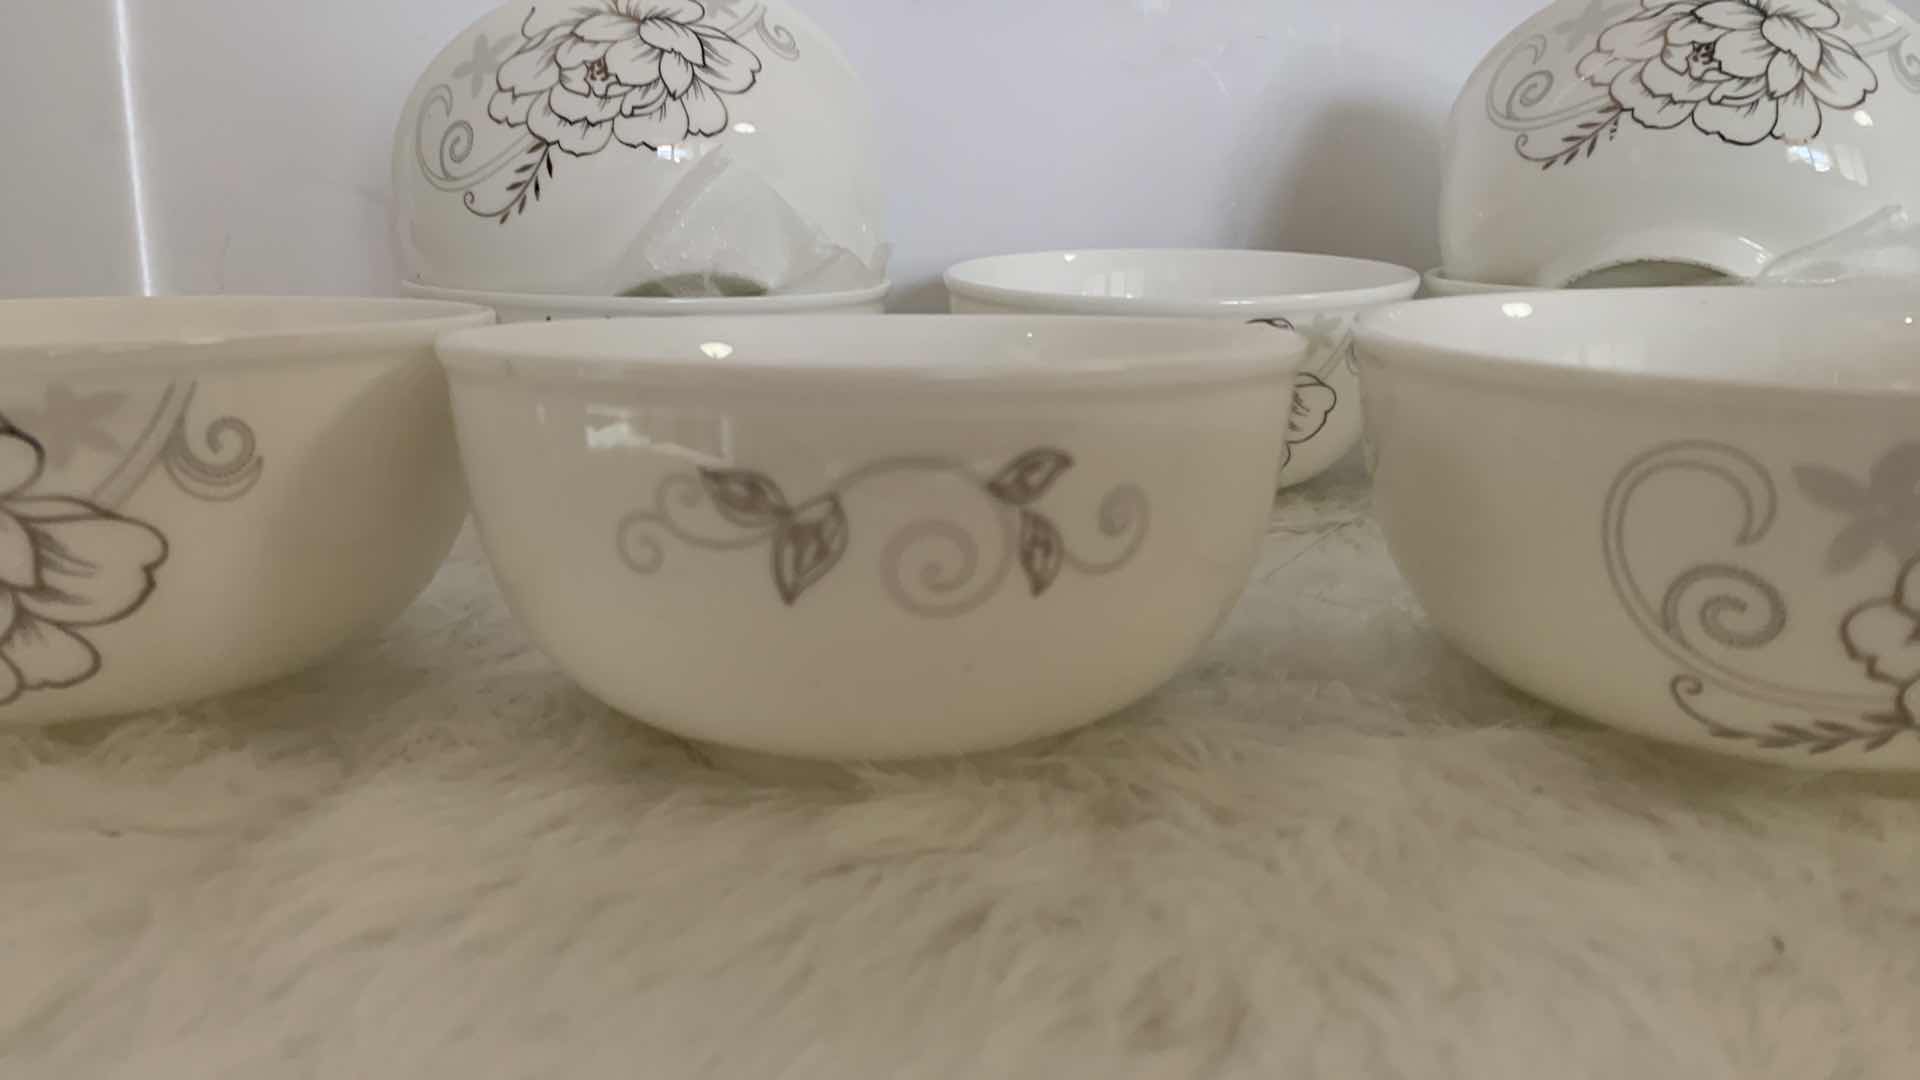 Photo 3 of 9 - SMALL WHITE PORCELAIN DESSERT BOWLS WITH FLOWER